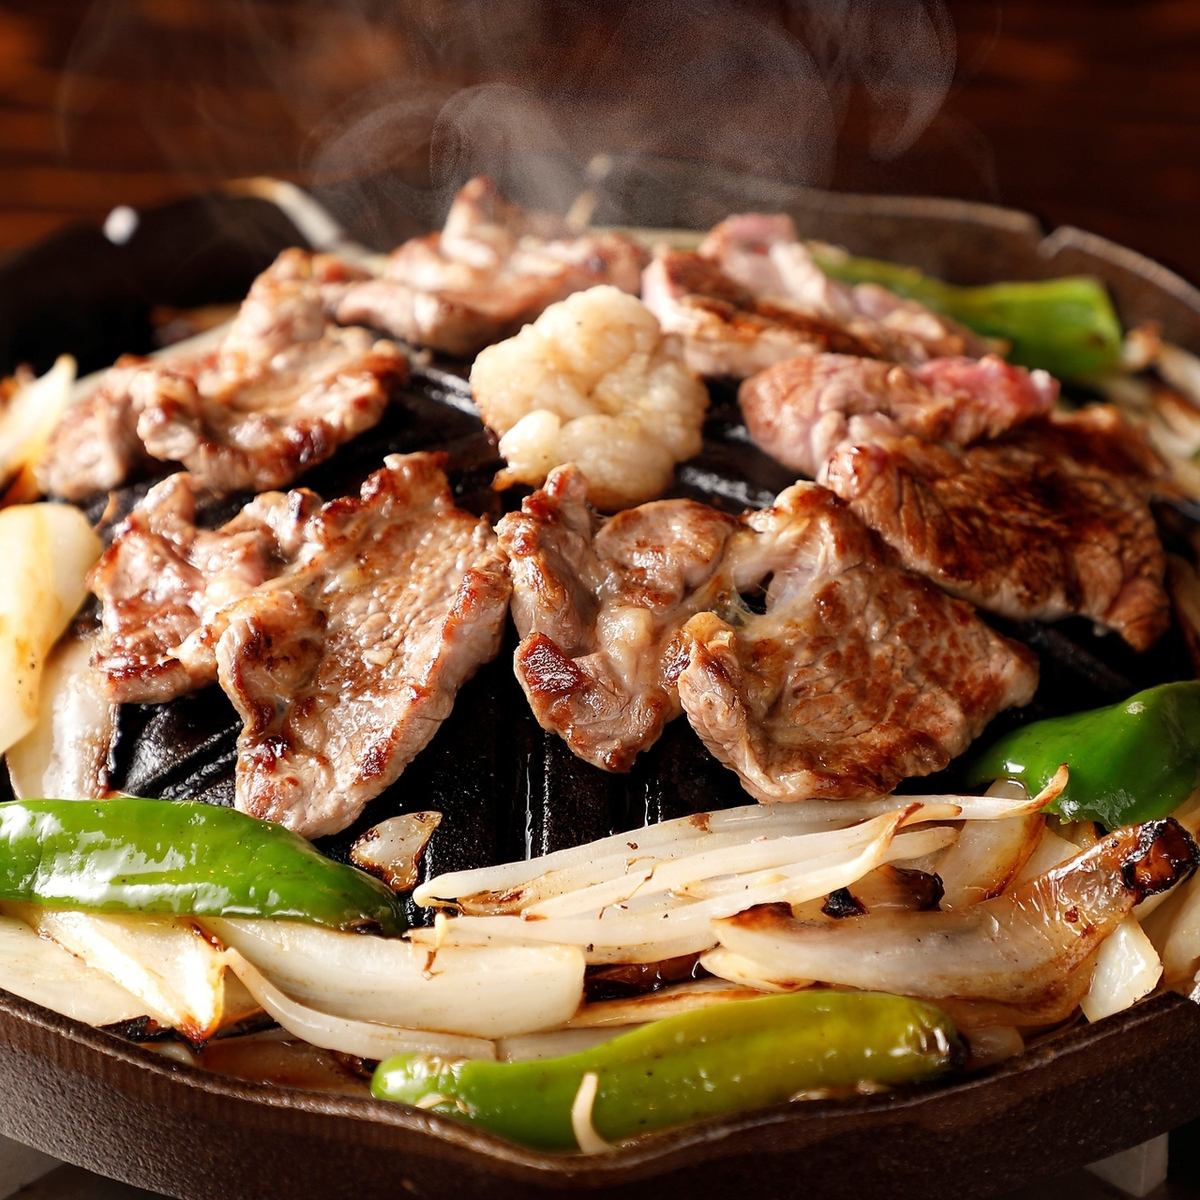 Please enjoy Genghis Khan using fresh lamb meat with outstanding freshness.